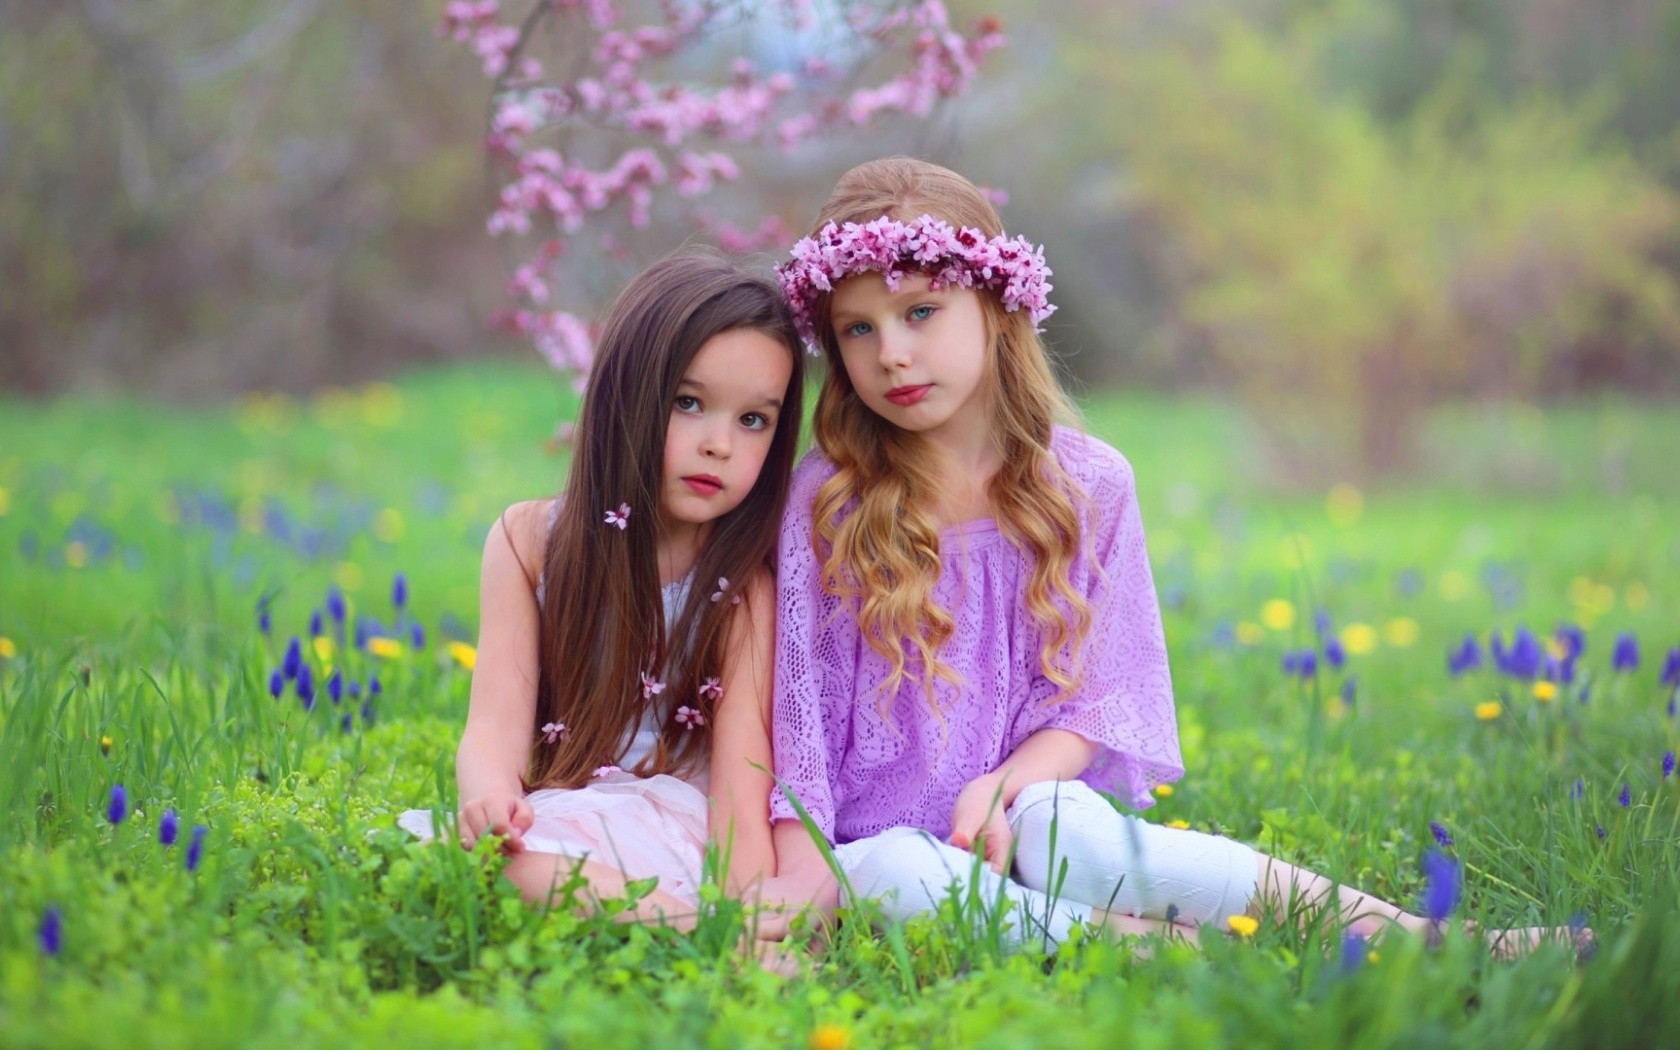 Cute Friendship Wallpaper Pictures